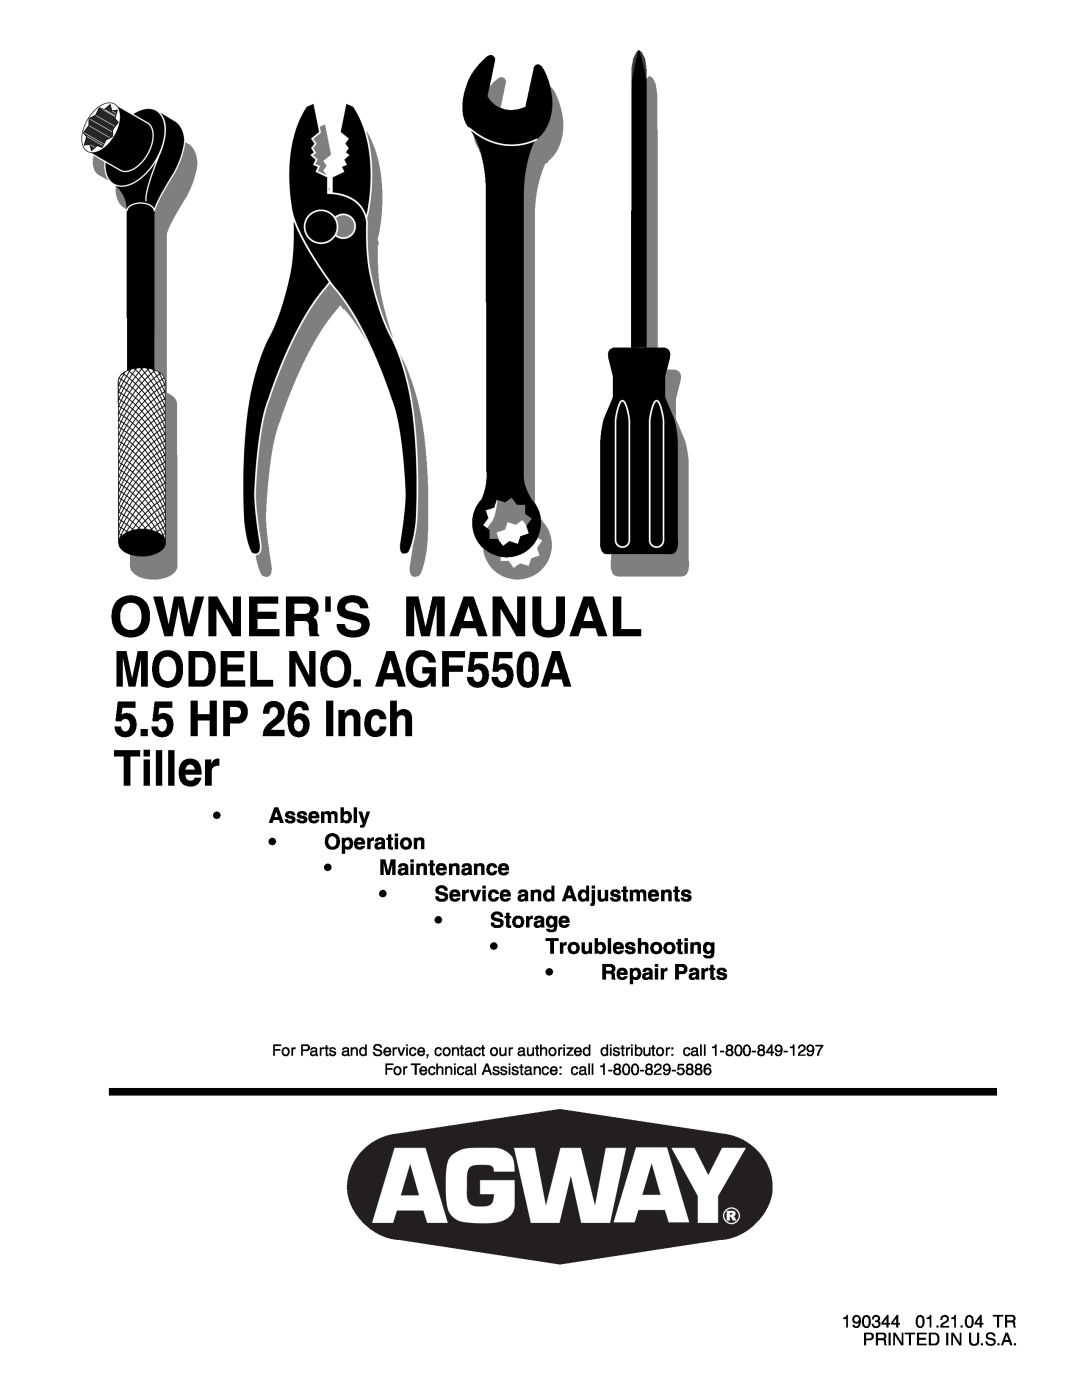 Poulan owner manual MODEL NO. AGF550A 5.5 HP 26 Inch Tiller, Troubleshooting Repair Parts 